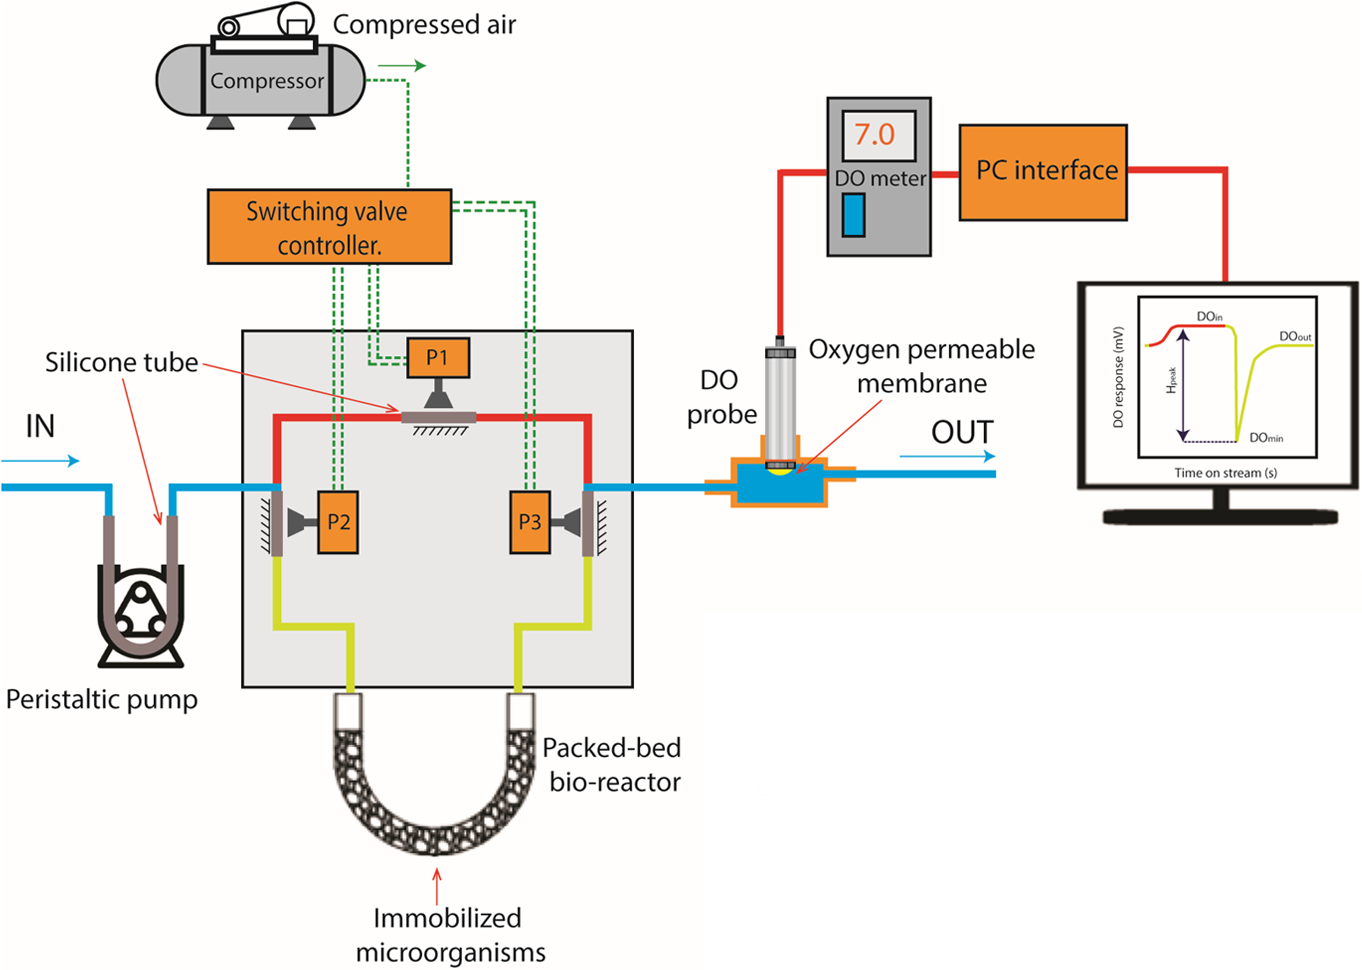 Schematic diagram of the BOD sensing system based on a packed-bed bioreactor (PBBR)